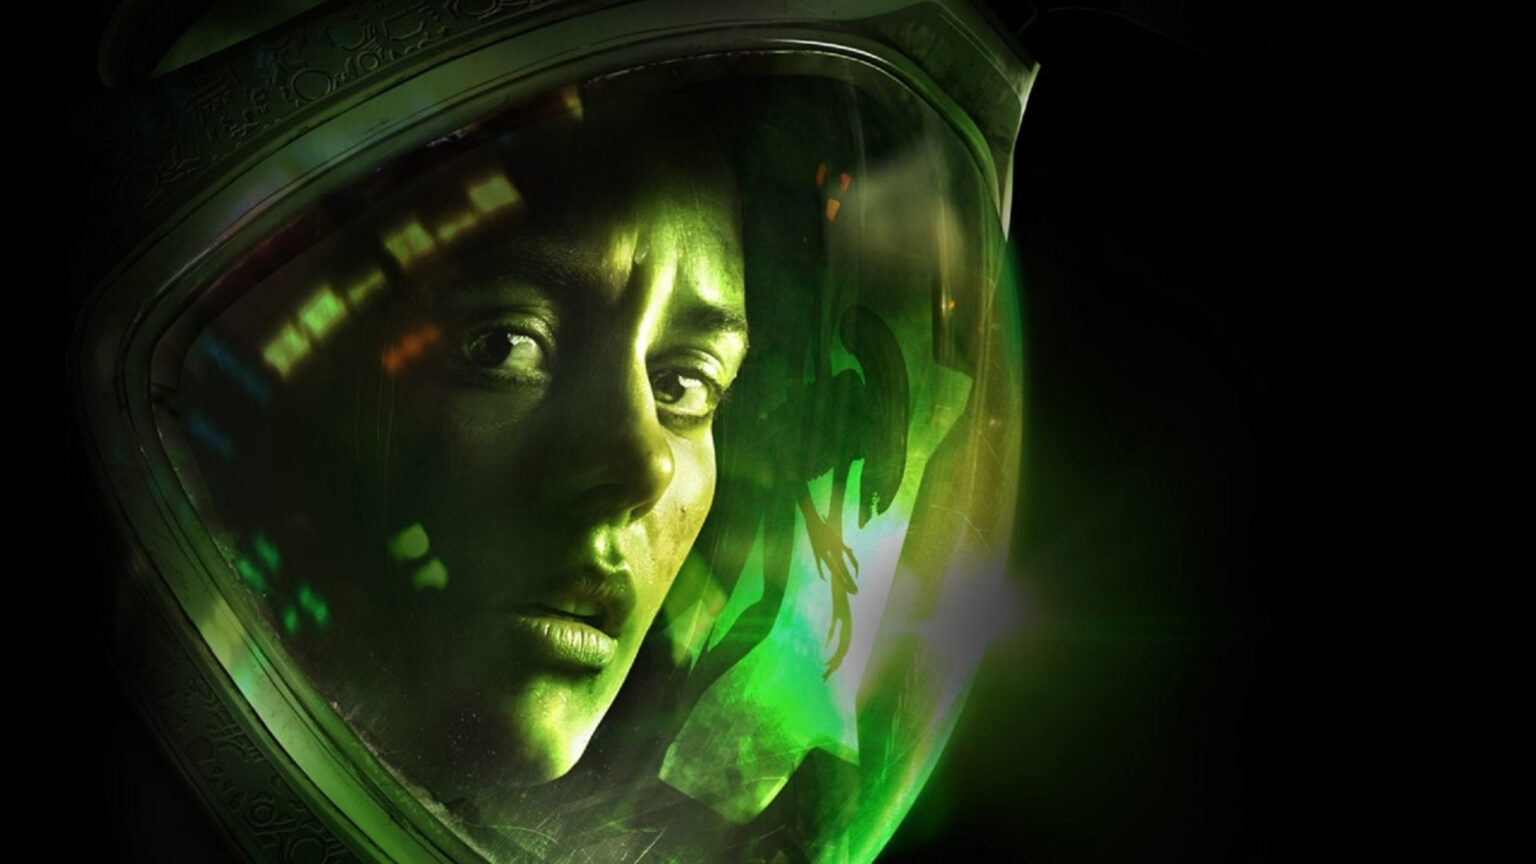 The 'Alien' series can terrify just about anyone, but opinions differ when it comes to the 'Alien' video games. Is 'Alien: Isolation' worth buying?